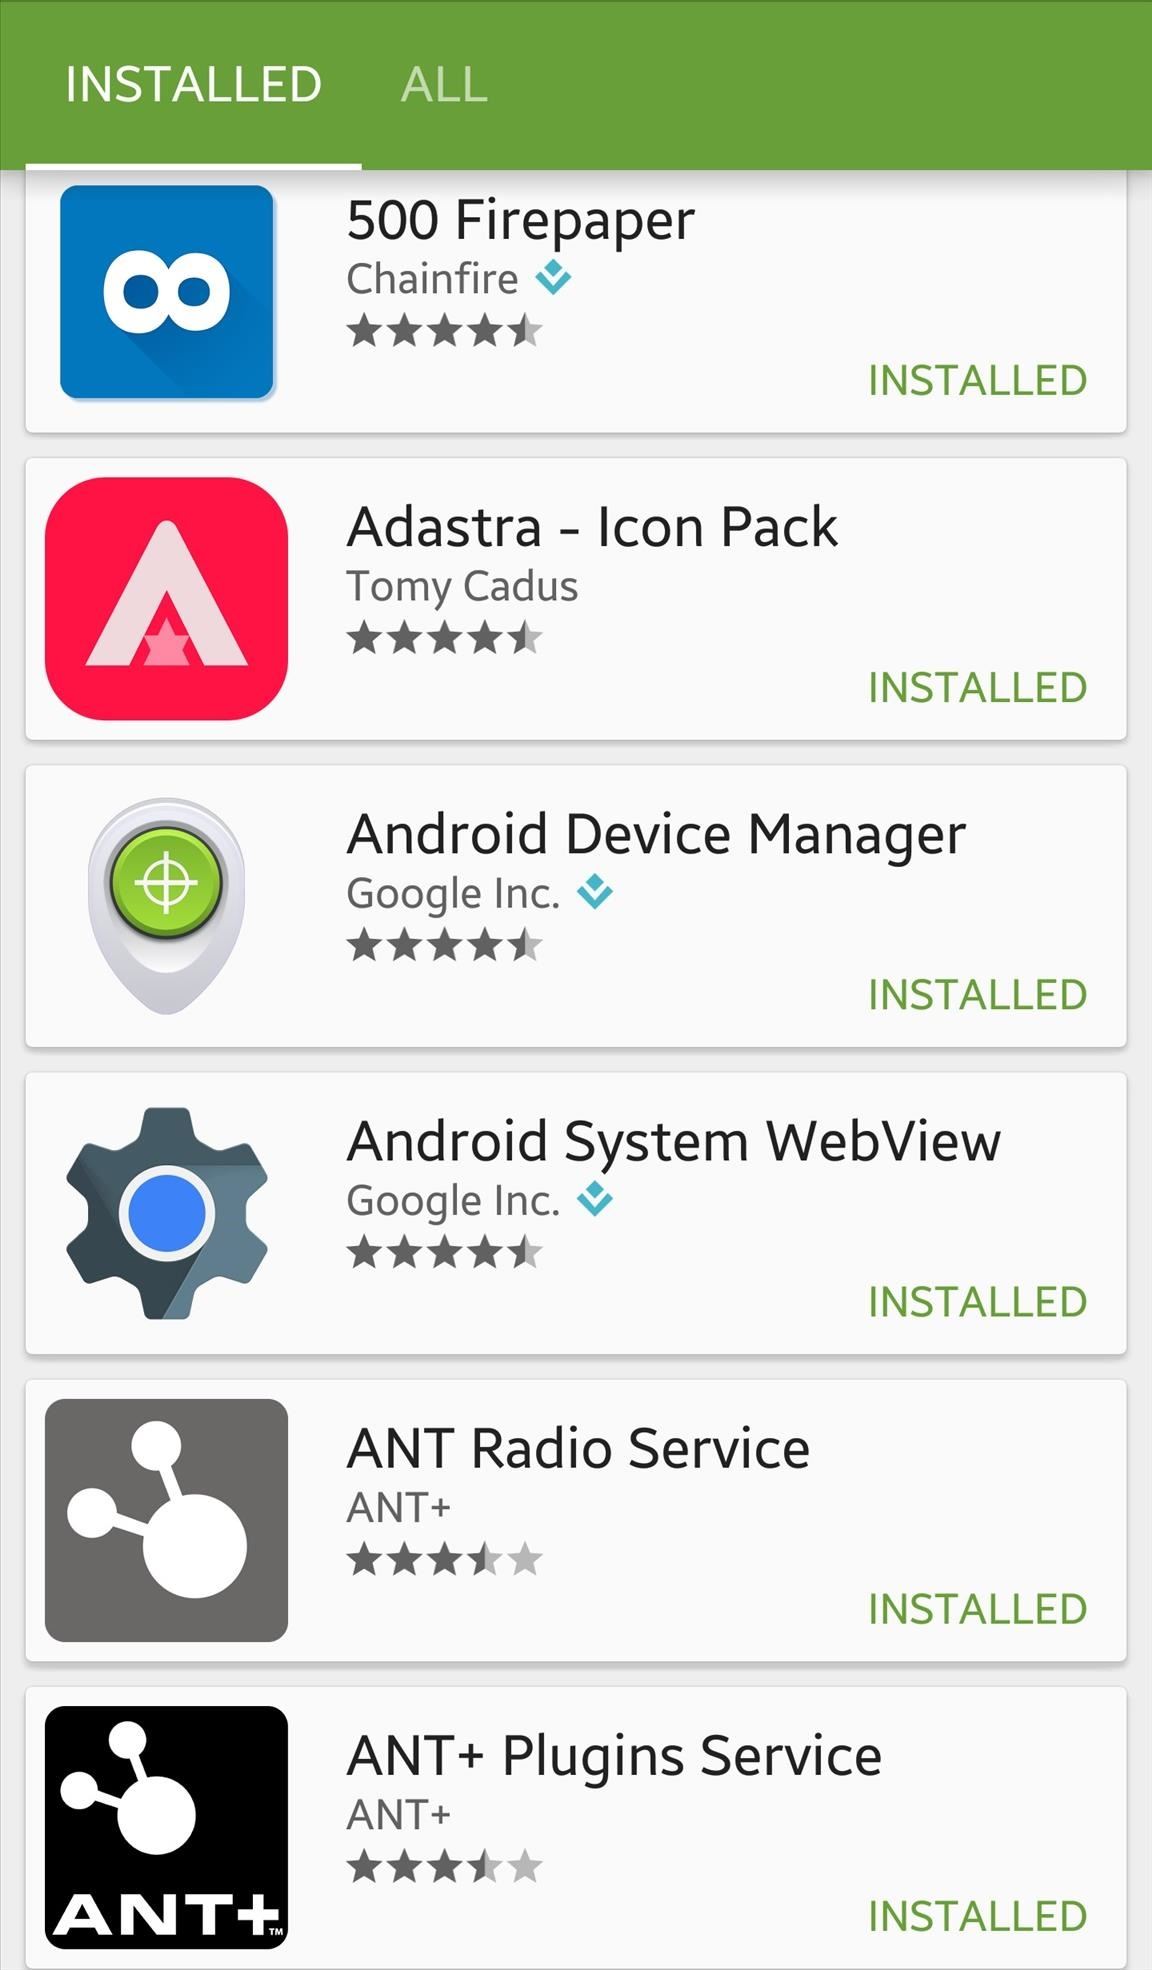 The Ultimate Guide to Deleting Apps & Bloatware on Android